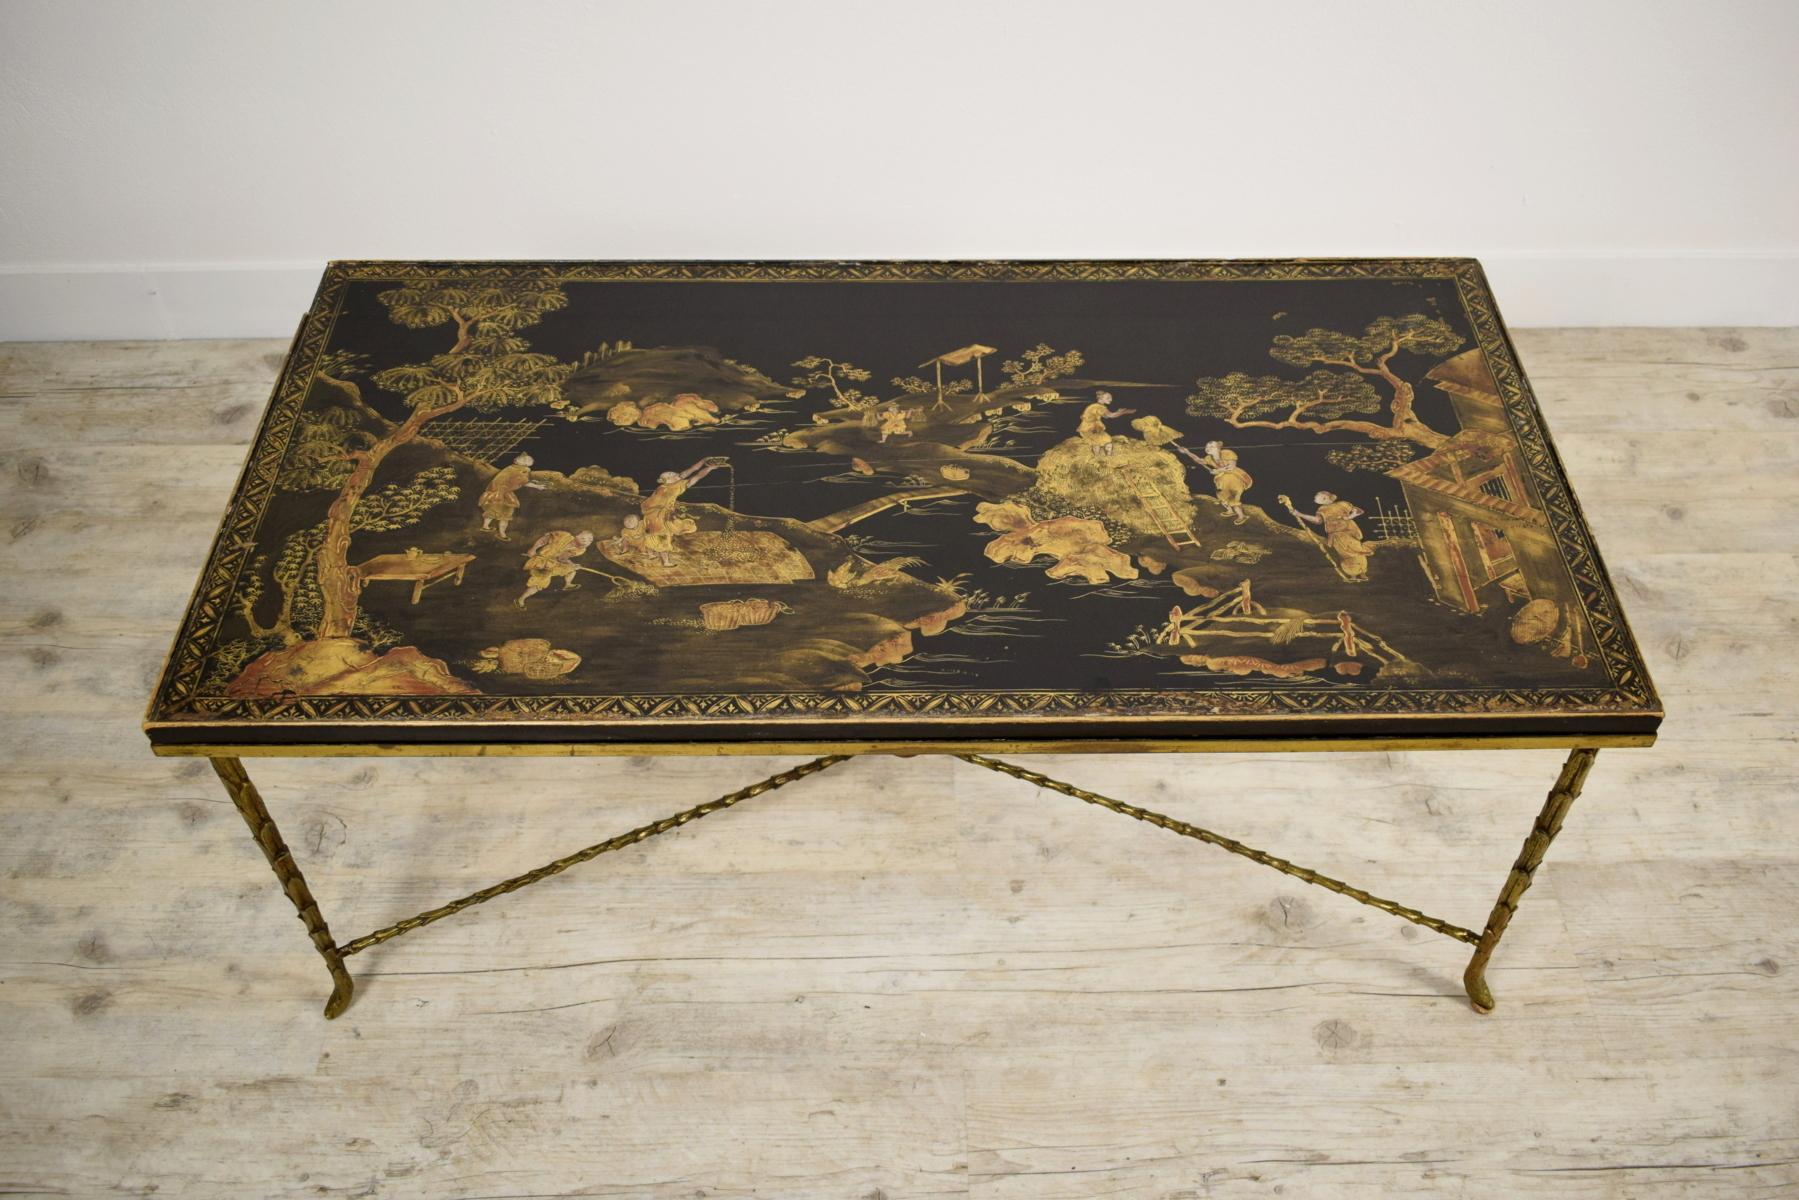 Very elegant Baguès gilt bronze and lacquered wood French Luigi XVI style coffee table.
20th century.
The coffee table are made in gilt bronze with stylized foliage decorations by the renowned French Maison Baguès. The plan is done in lacquered